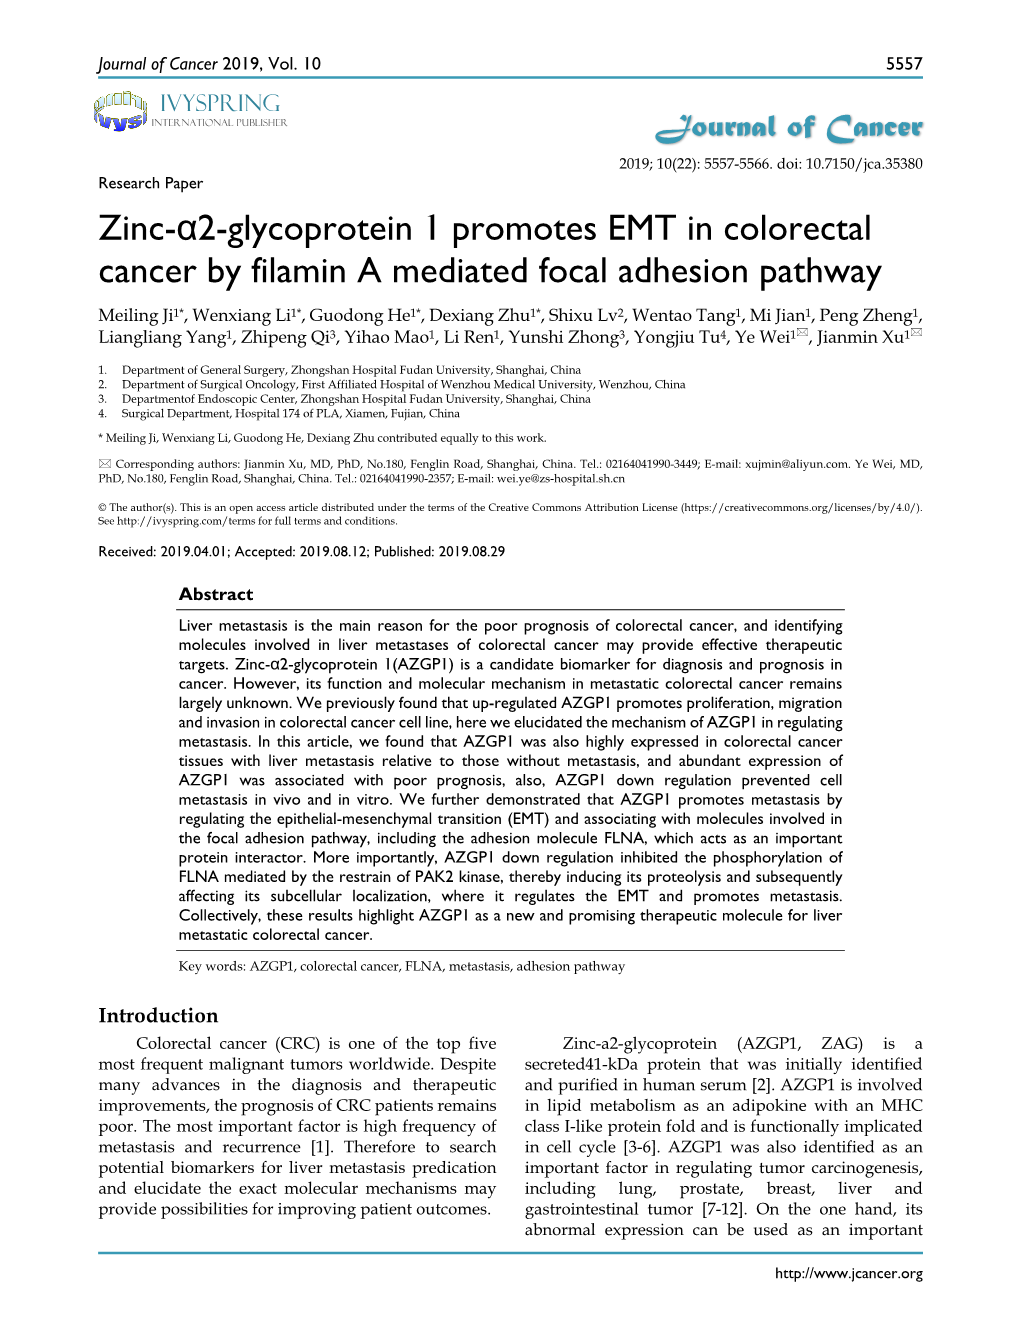 Zinc-Α2-Glycoprotein 1 Promotes EMT in Colorectal Cancer by Filamin A